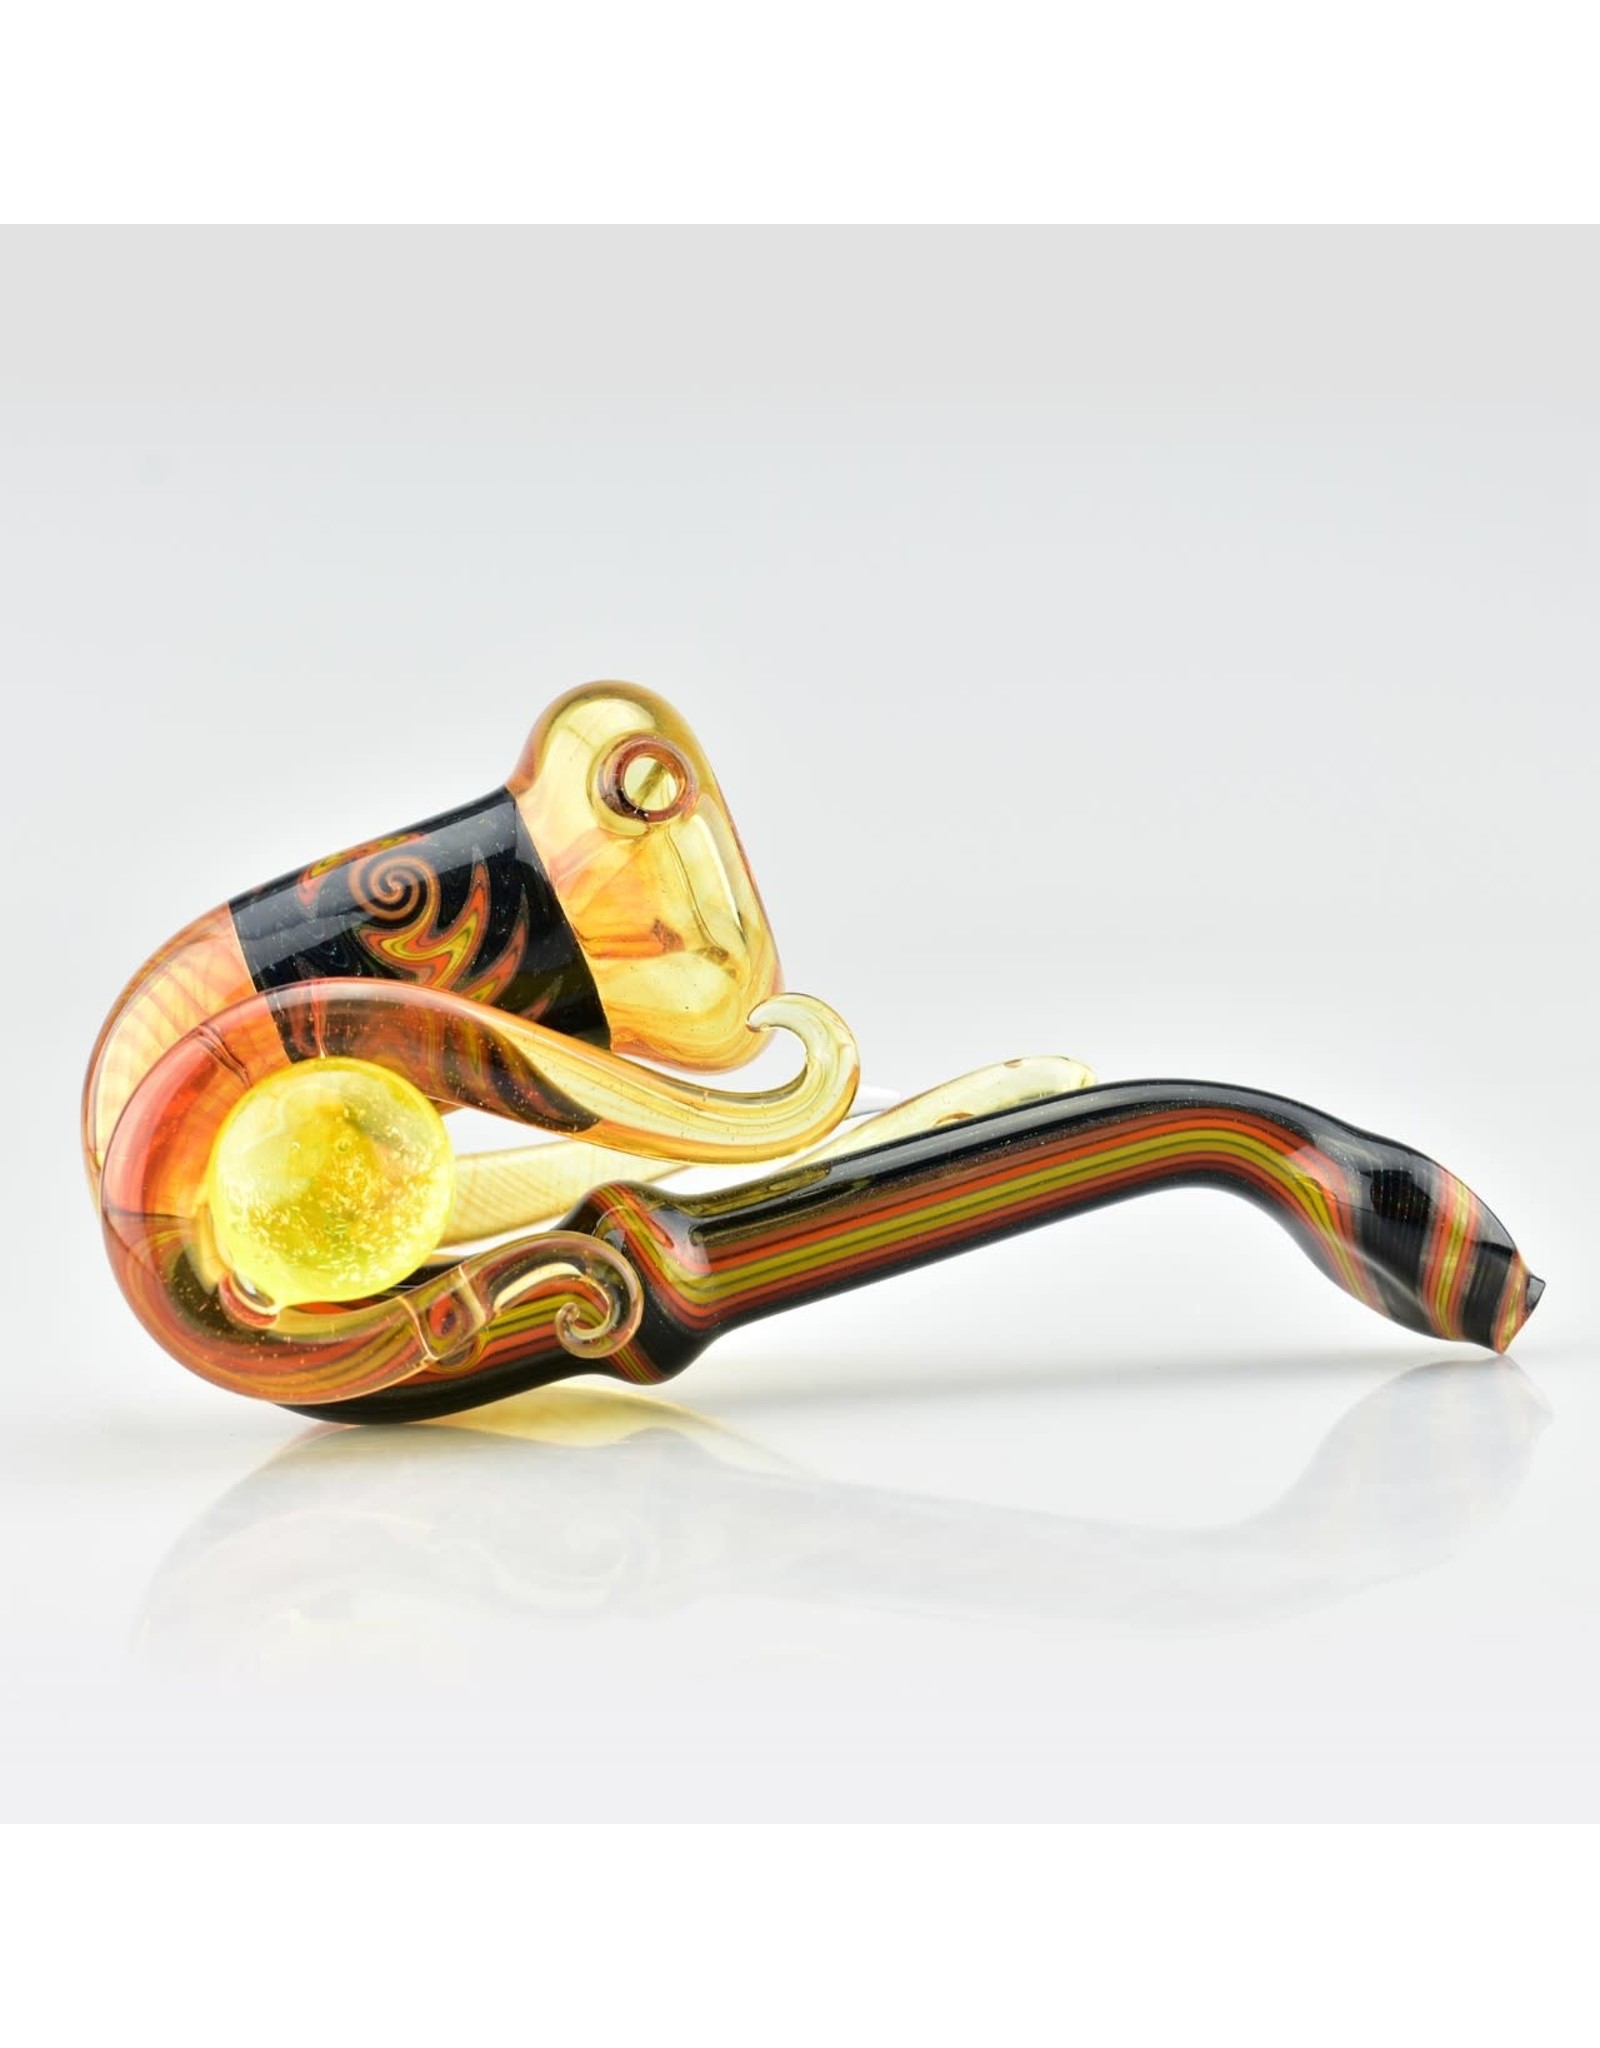 fire and black sherlock with yellow dicro marble and 3 horns